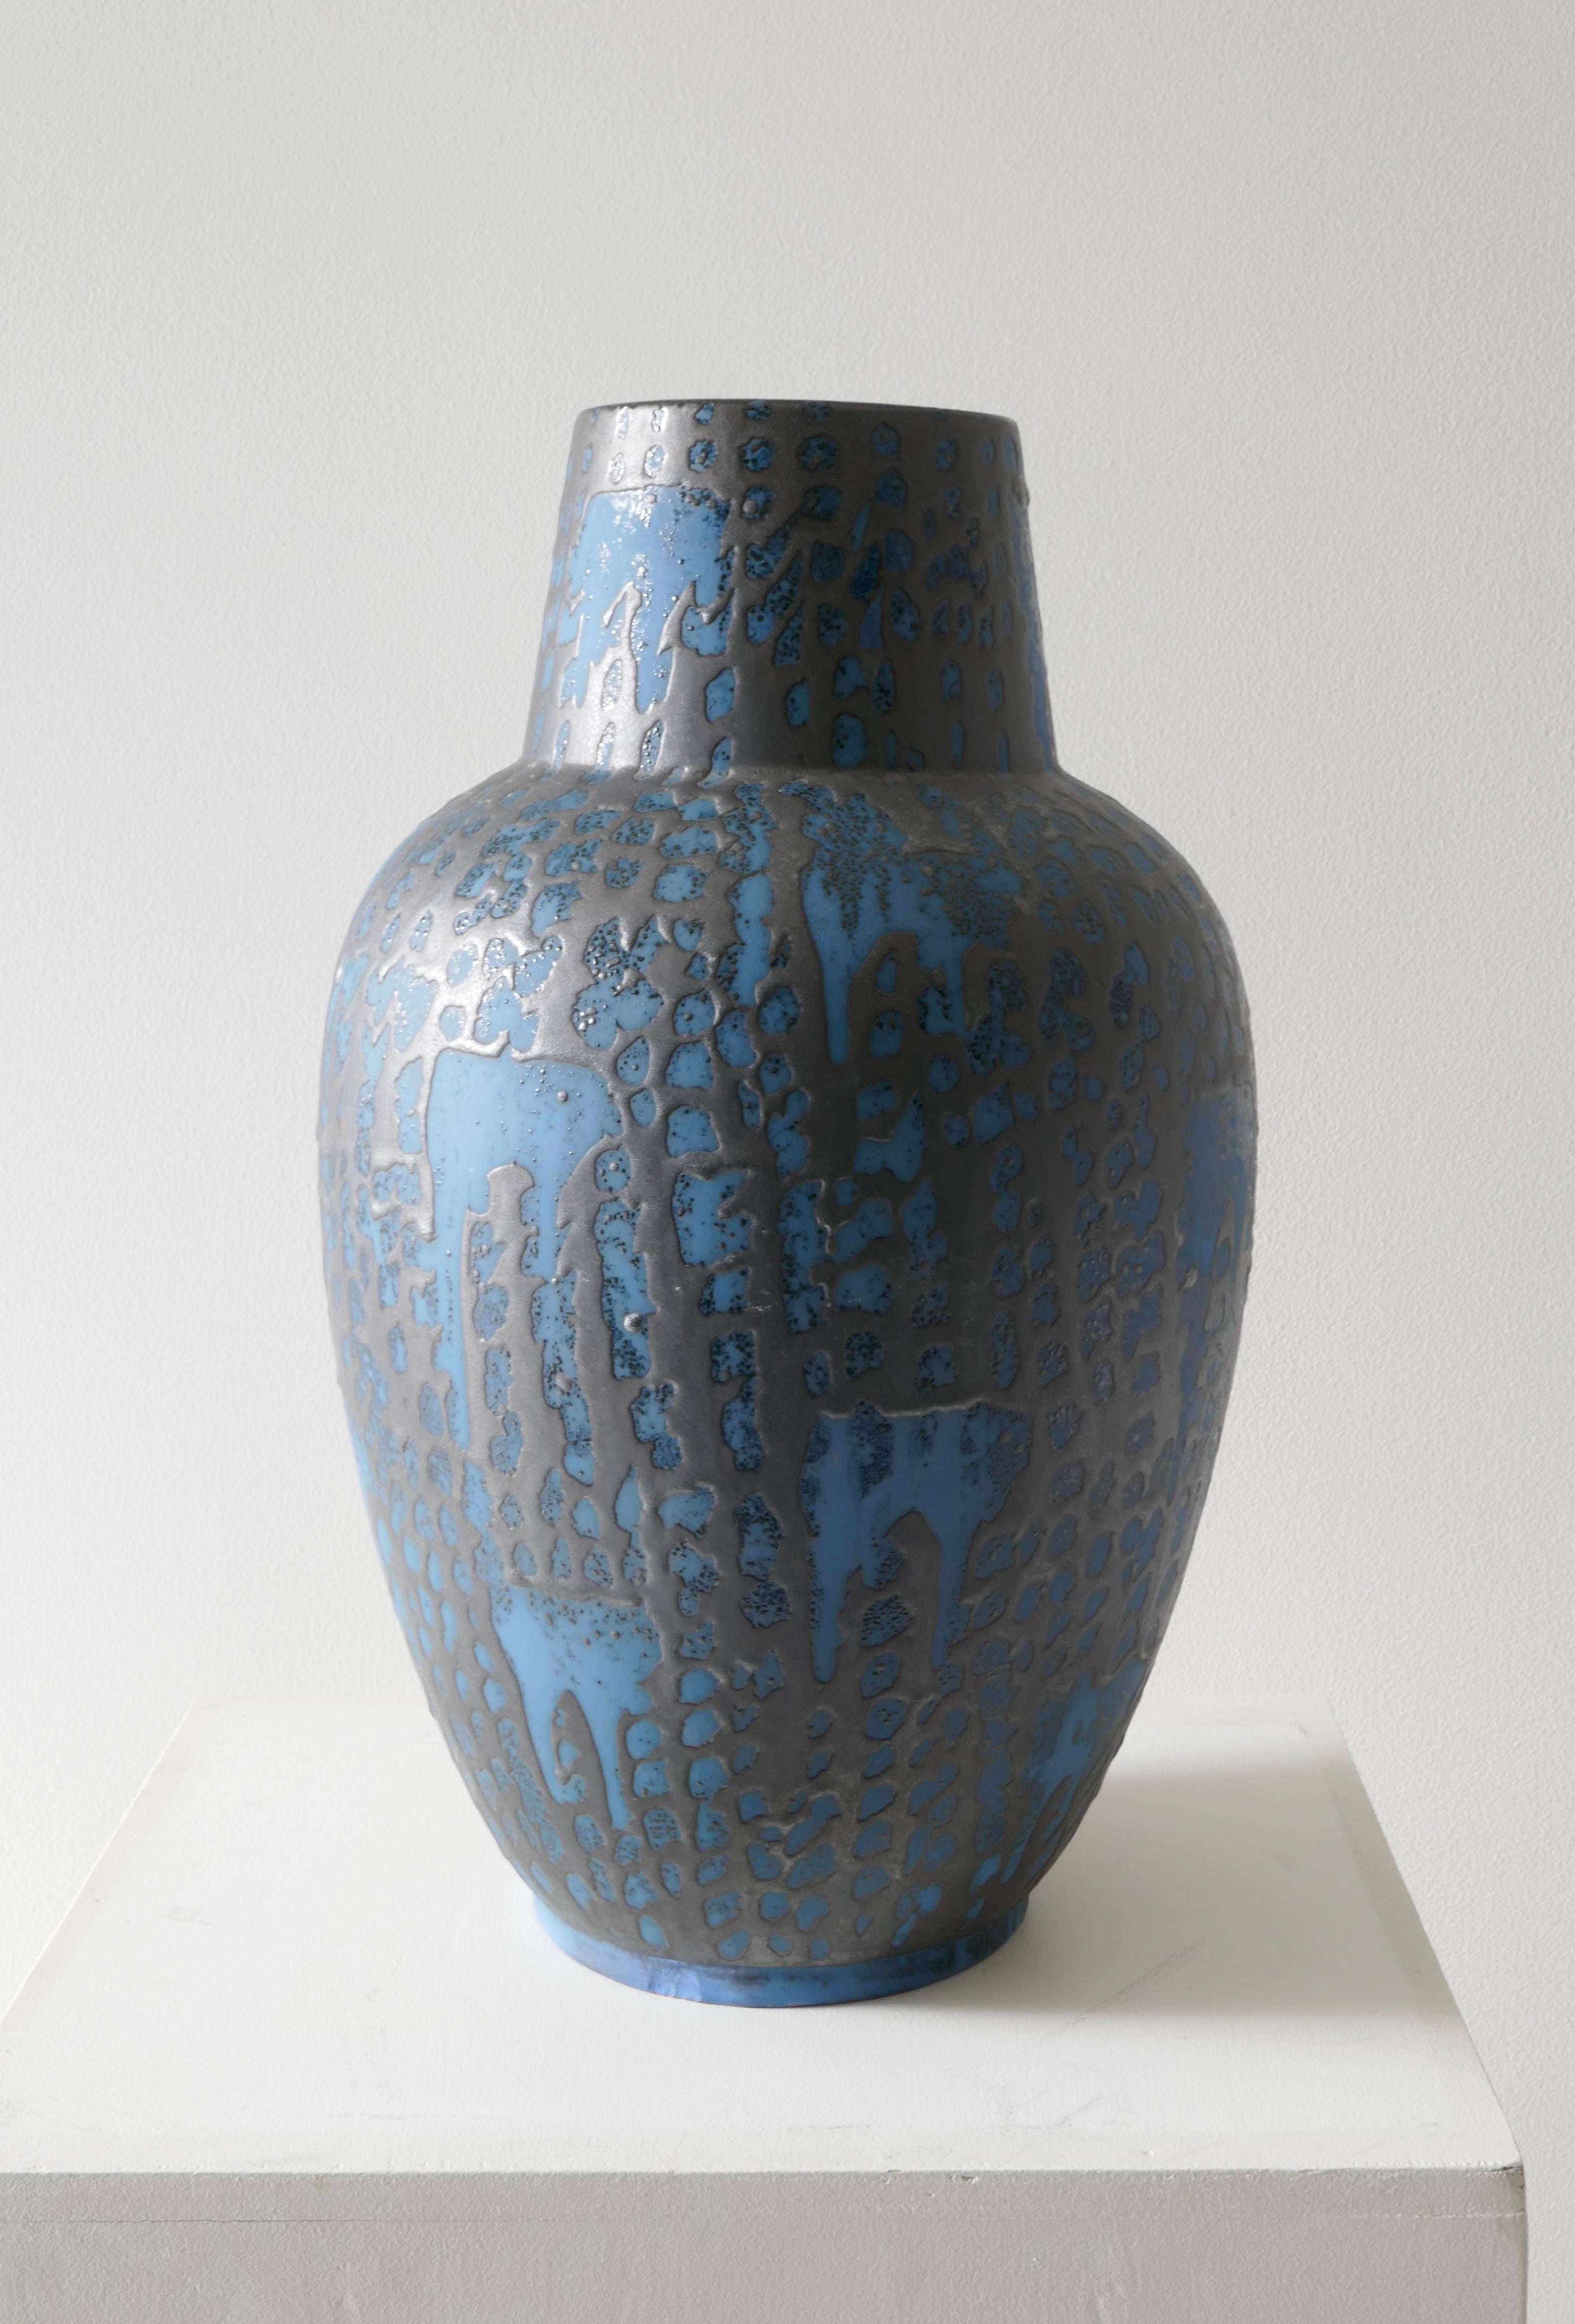 Large Ceramic Graphite and Blue Vase, West Germany 1970's For Sale 2